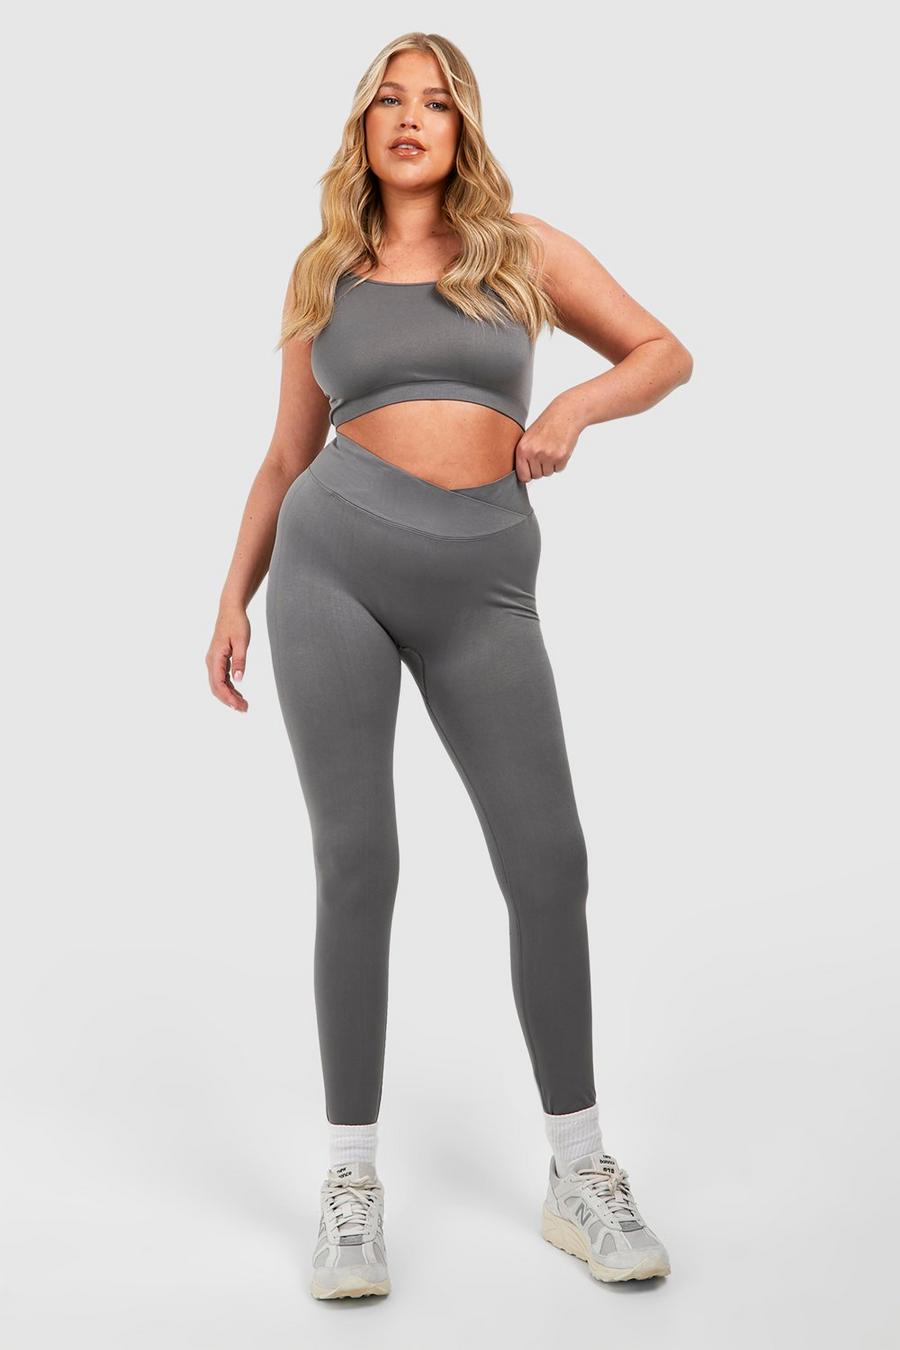 Grande taille - Legging sans coutures, Charcoal image number 1